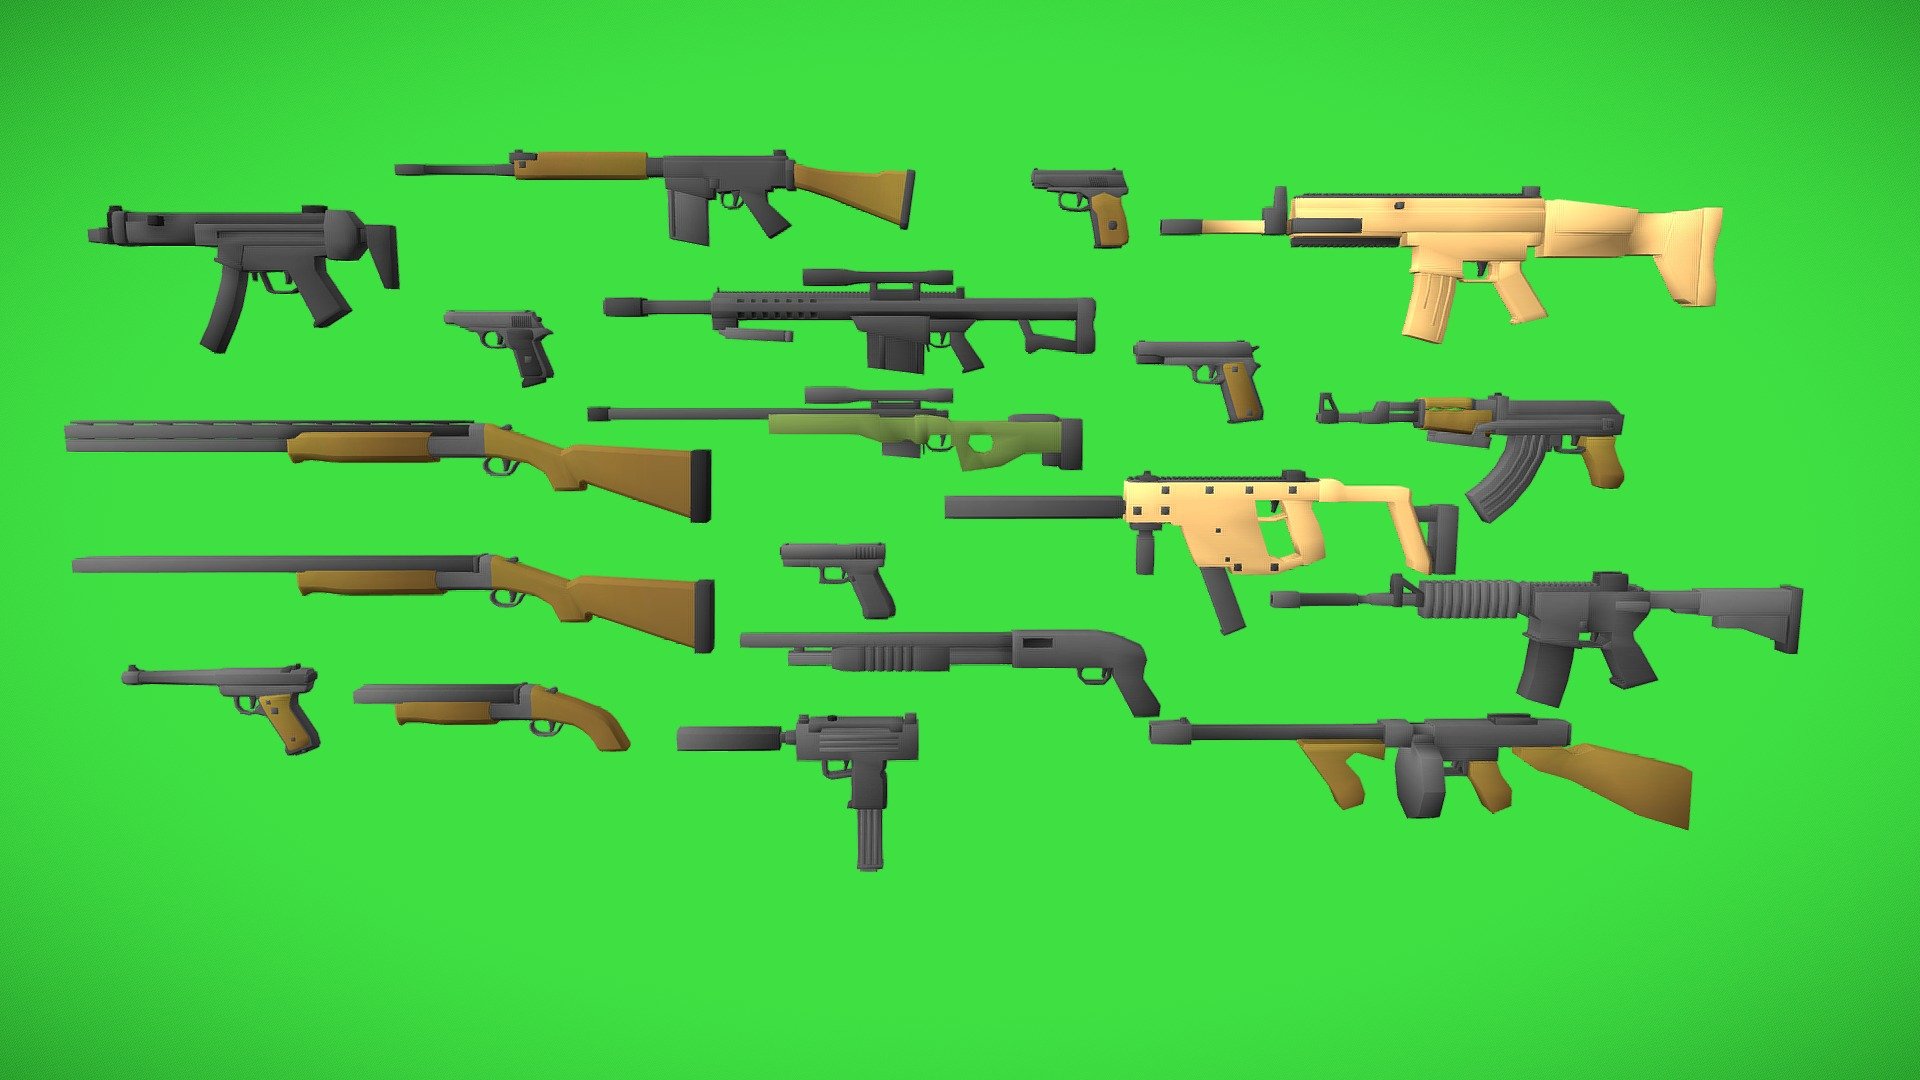 LOWLY POLY - CARTOON GUNS
19 low poly rigged guns.
All the rigs have a &ldquo;main